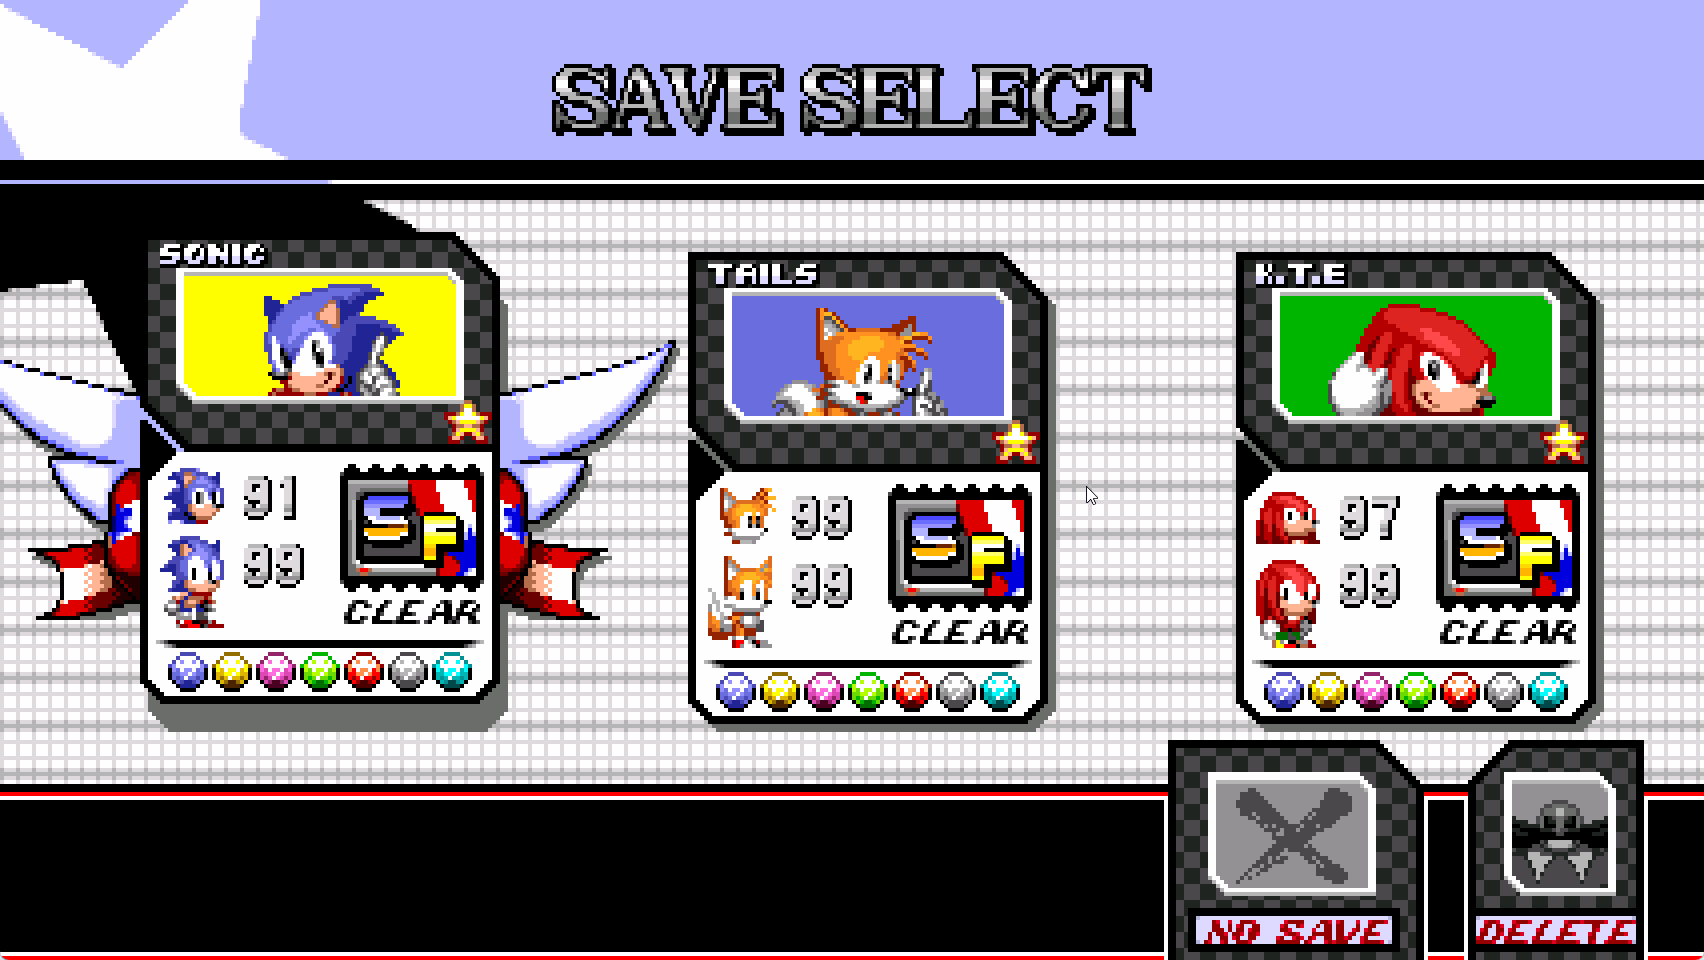 SuperPlushMultiverse's Time Stop Collab (Sonic The Hedgehog Sprite